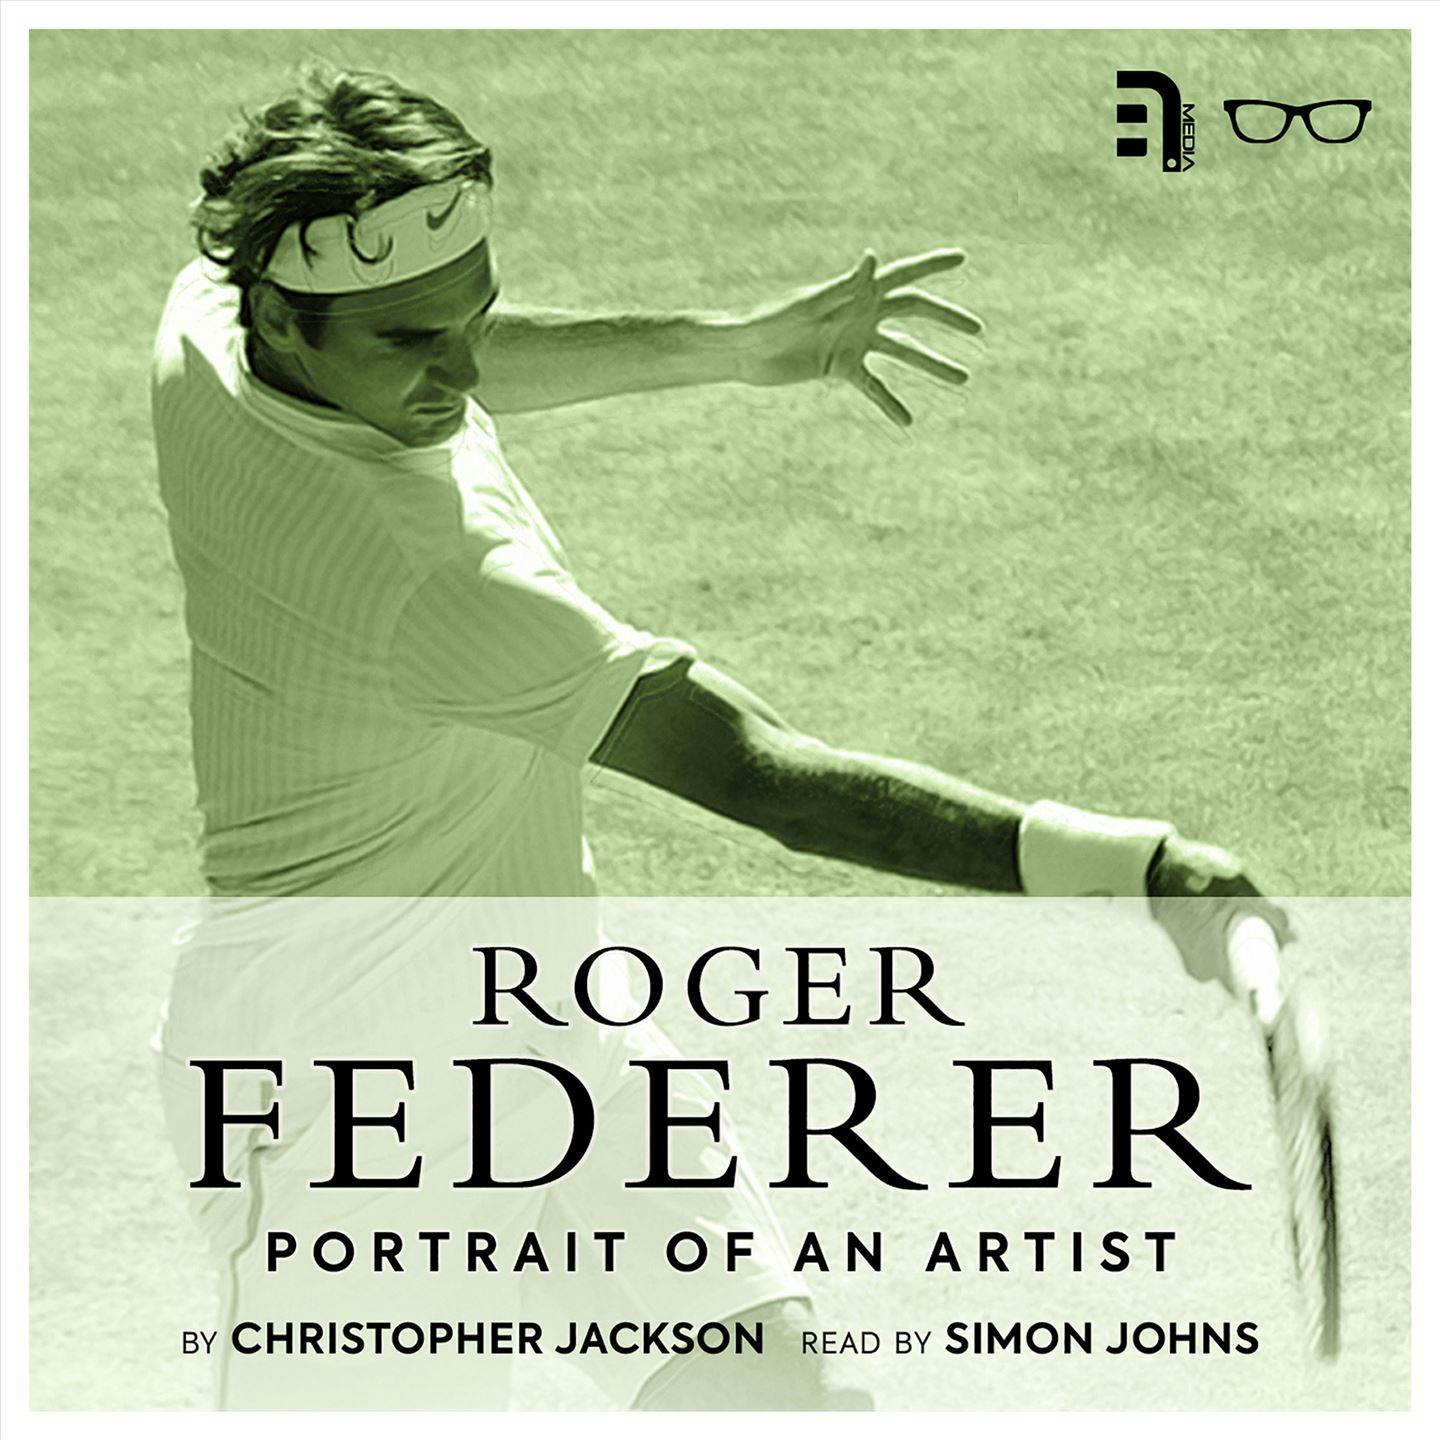 Roger Federer: Portrait of an Artist: A study and biography of one of tennis’ greatest players - Christopher Jackson